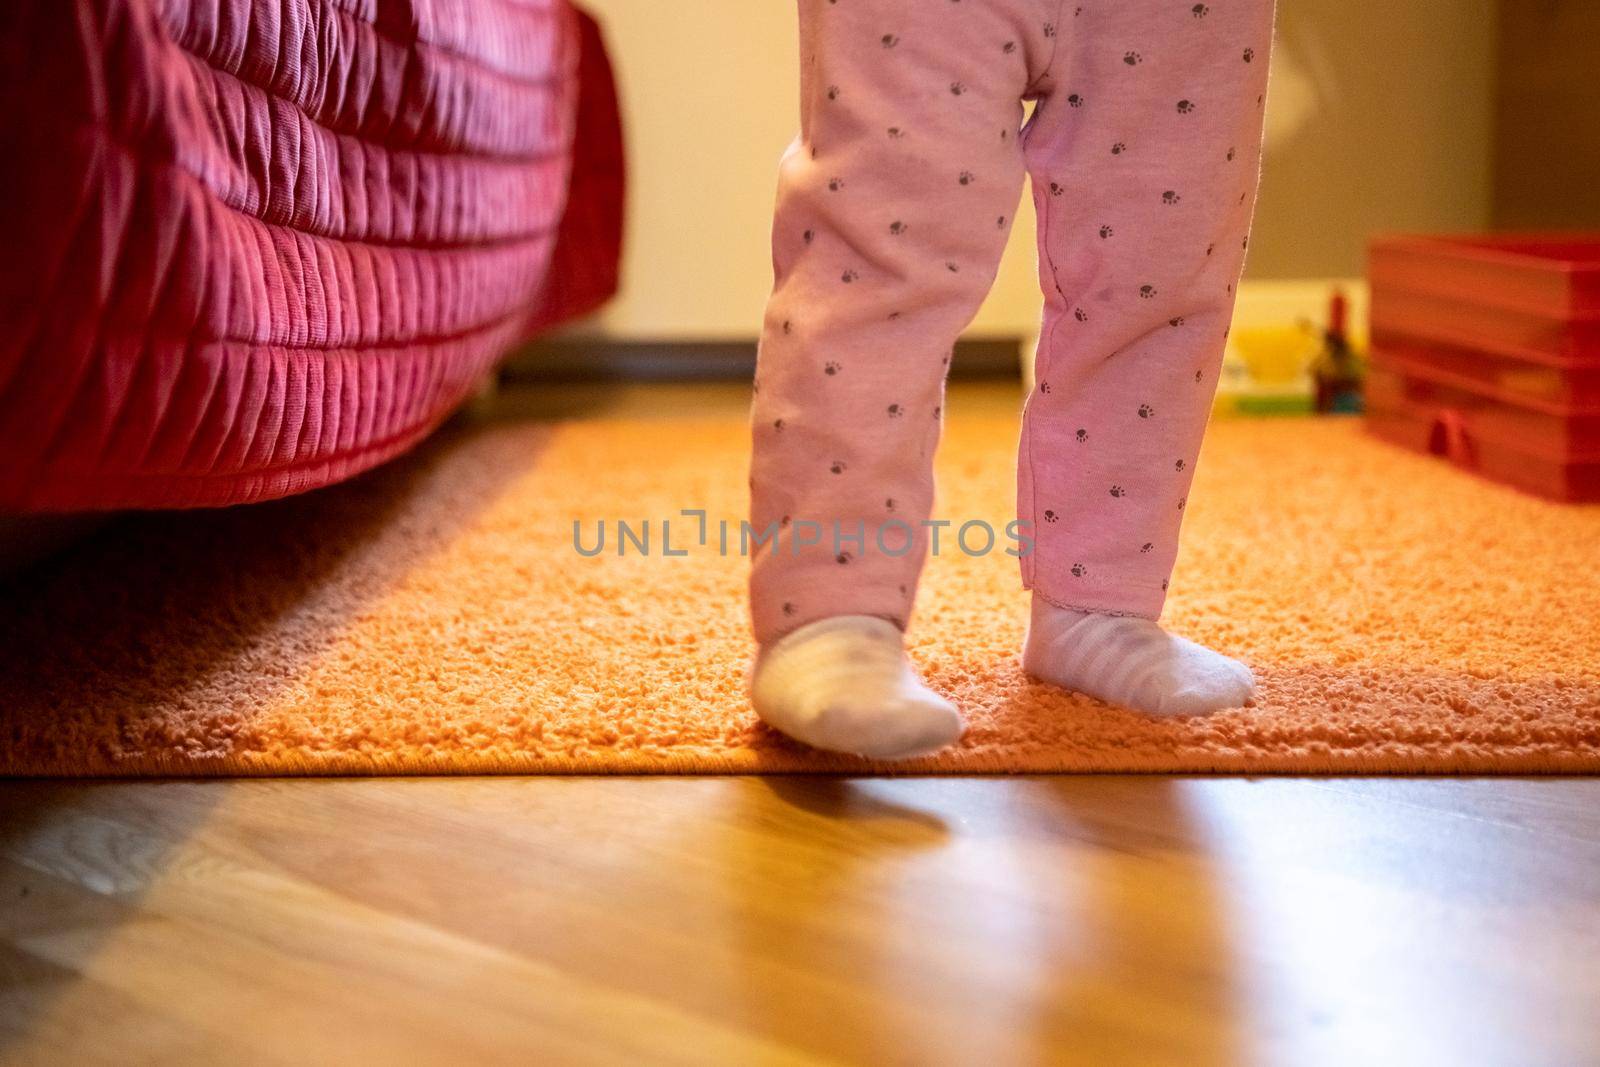 the legs of a small child are walking around the room. baby's first steps concept. no face. happy parenthood